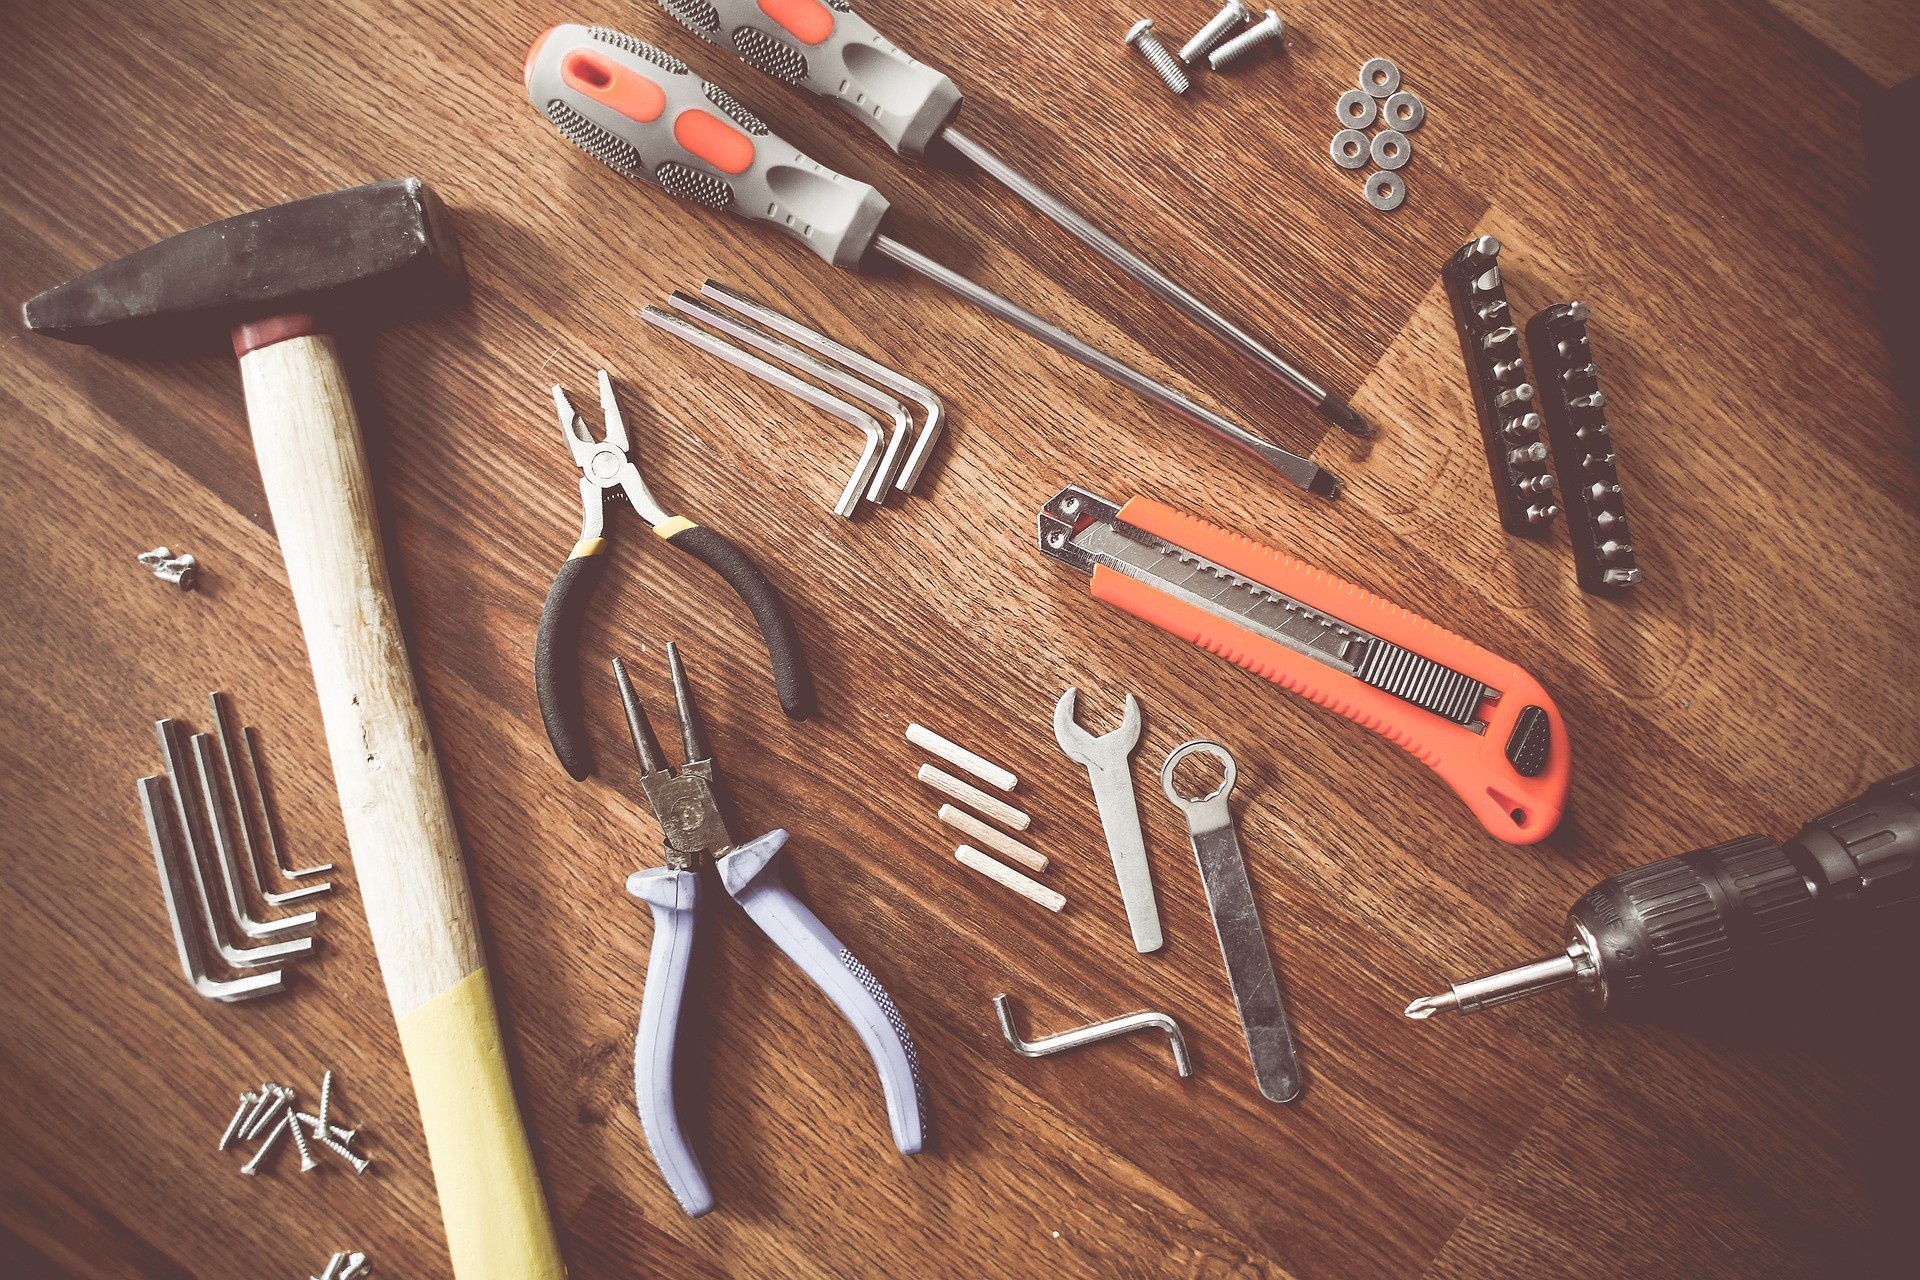 5 most frequent mistakes with hand tools